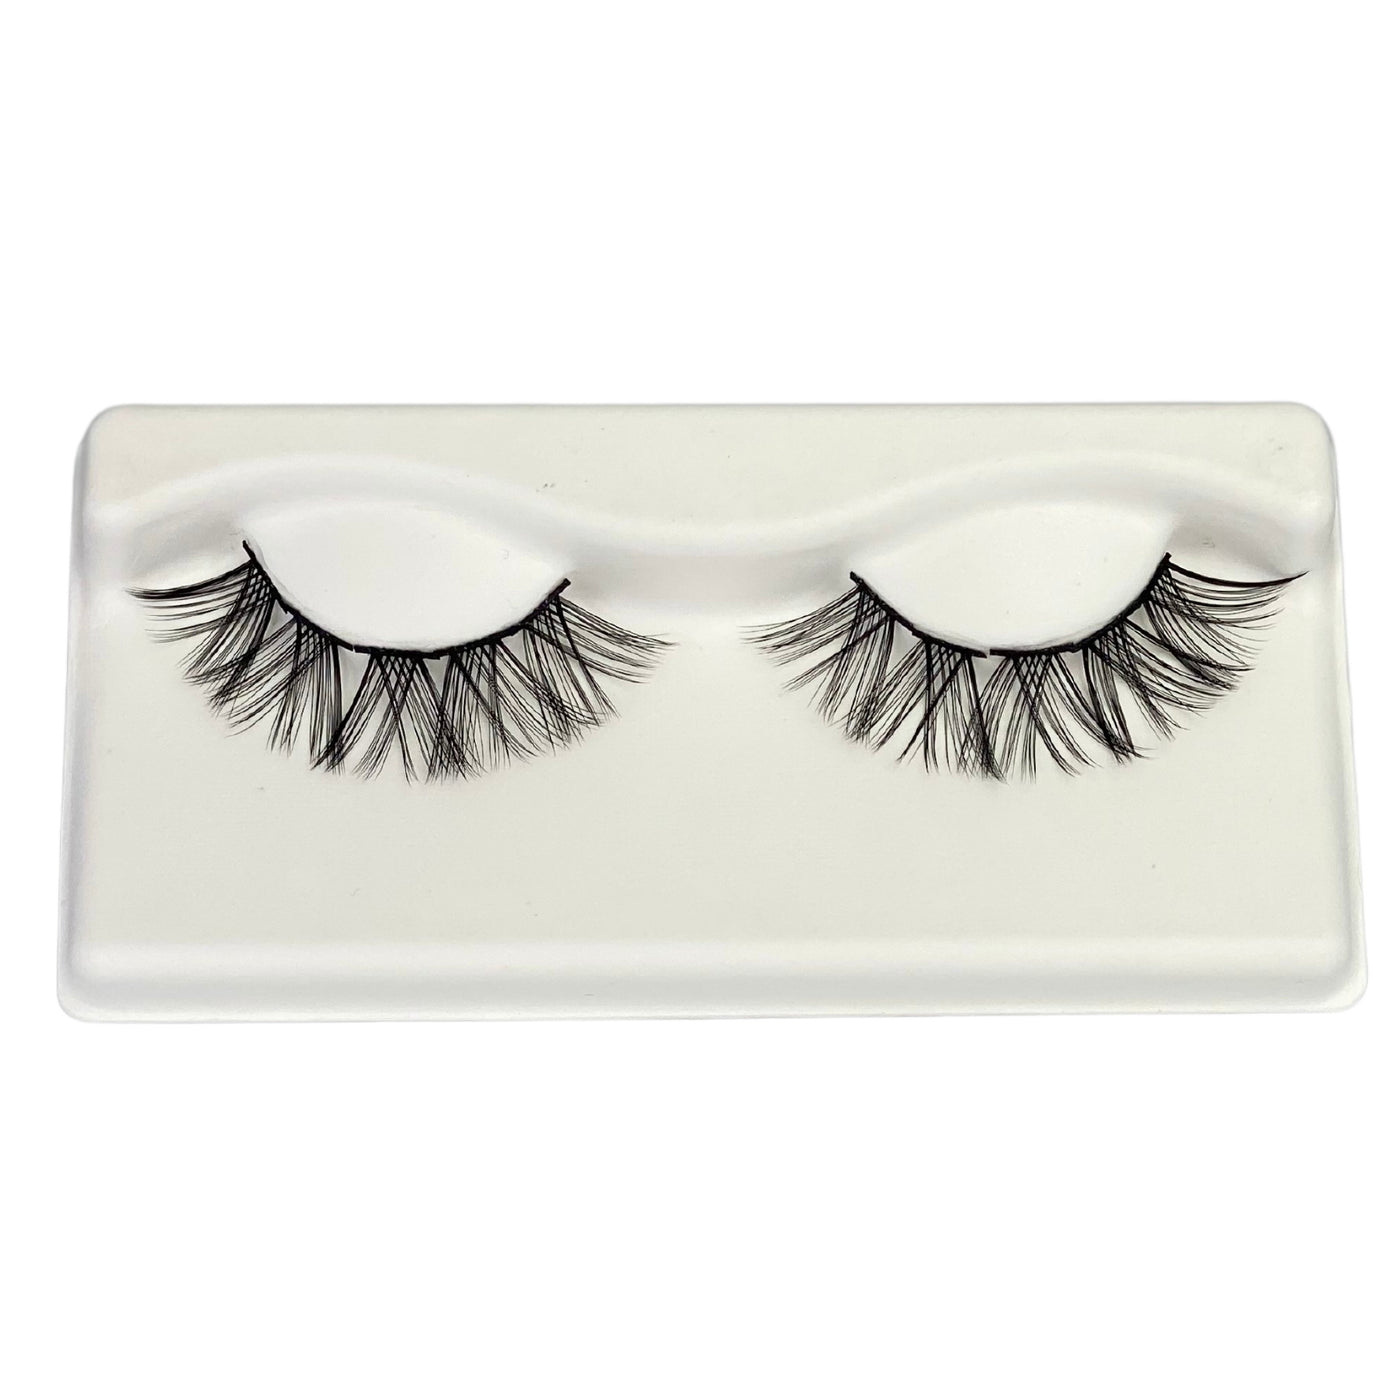 ripsitupsut 4Beauty Finland DIY Lashes Fabulous in the Evening